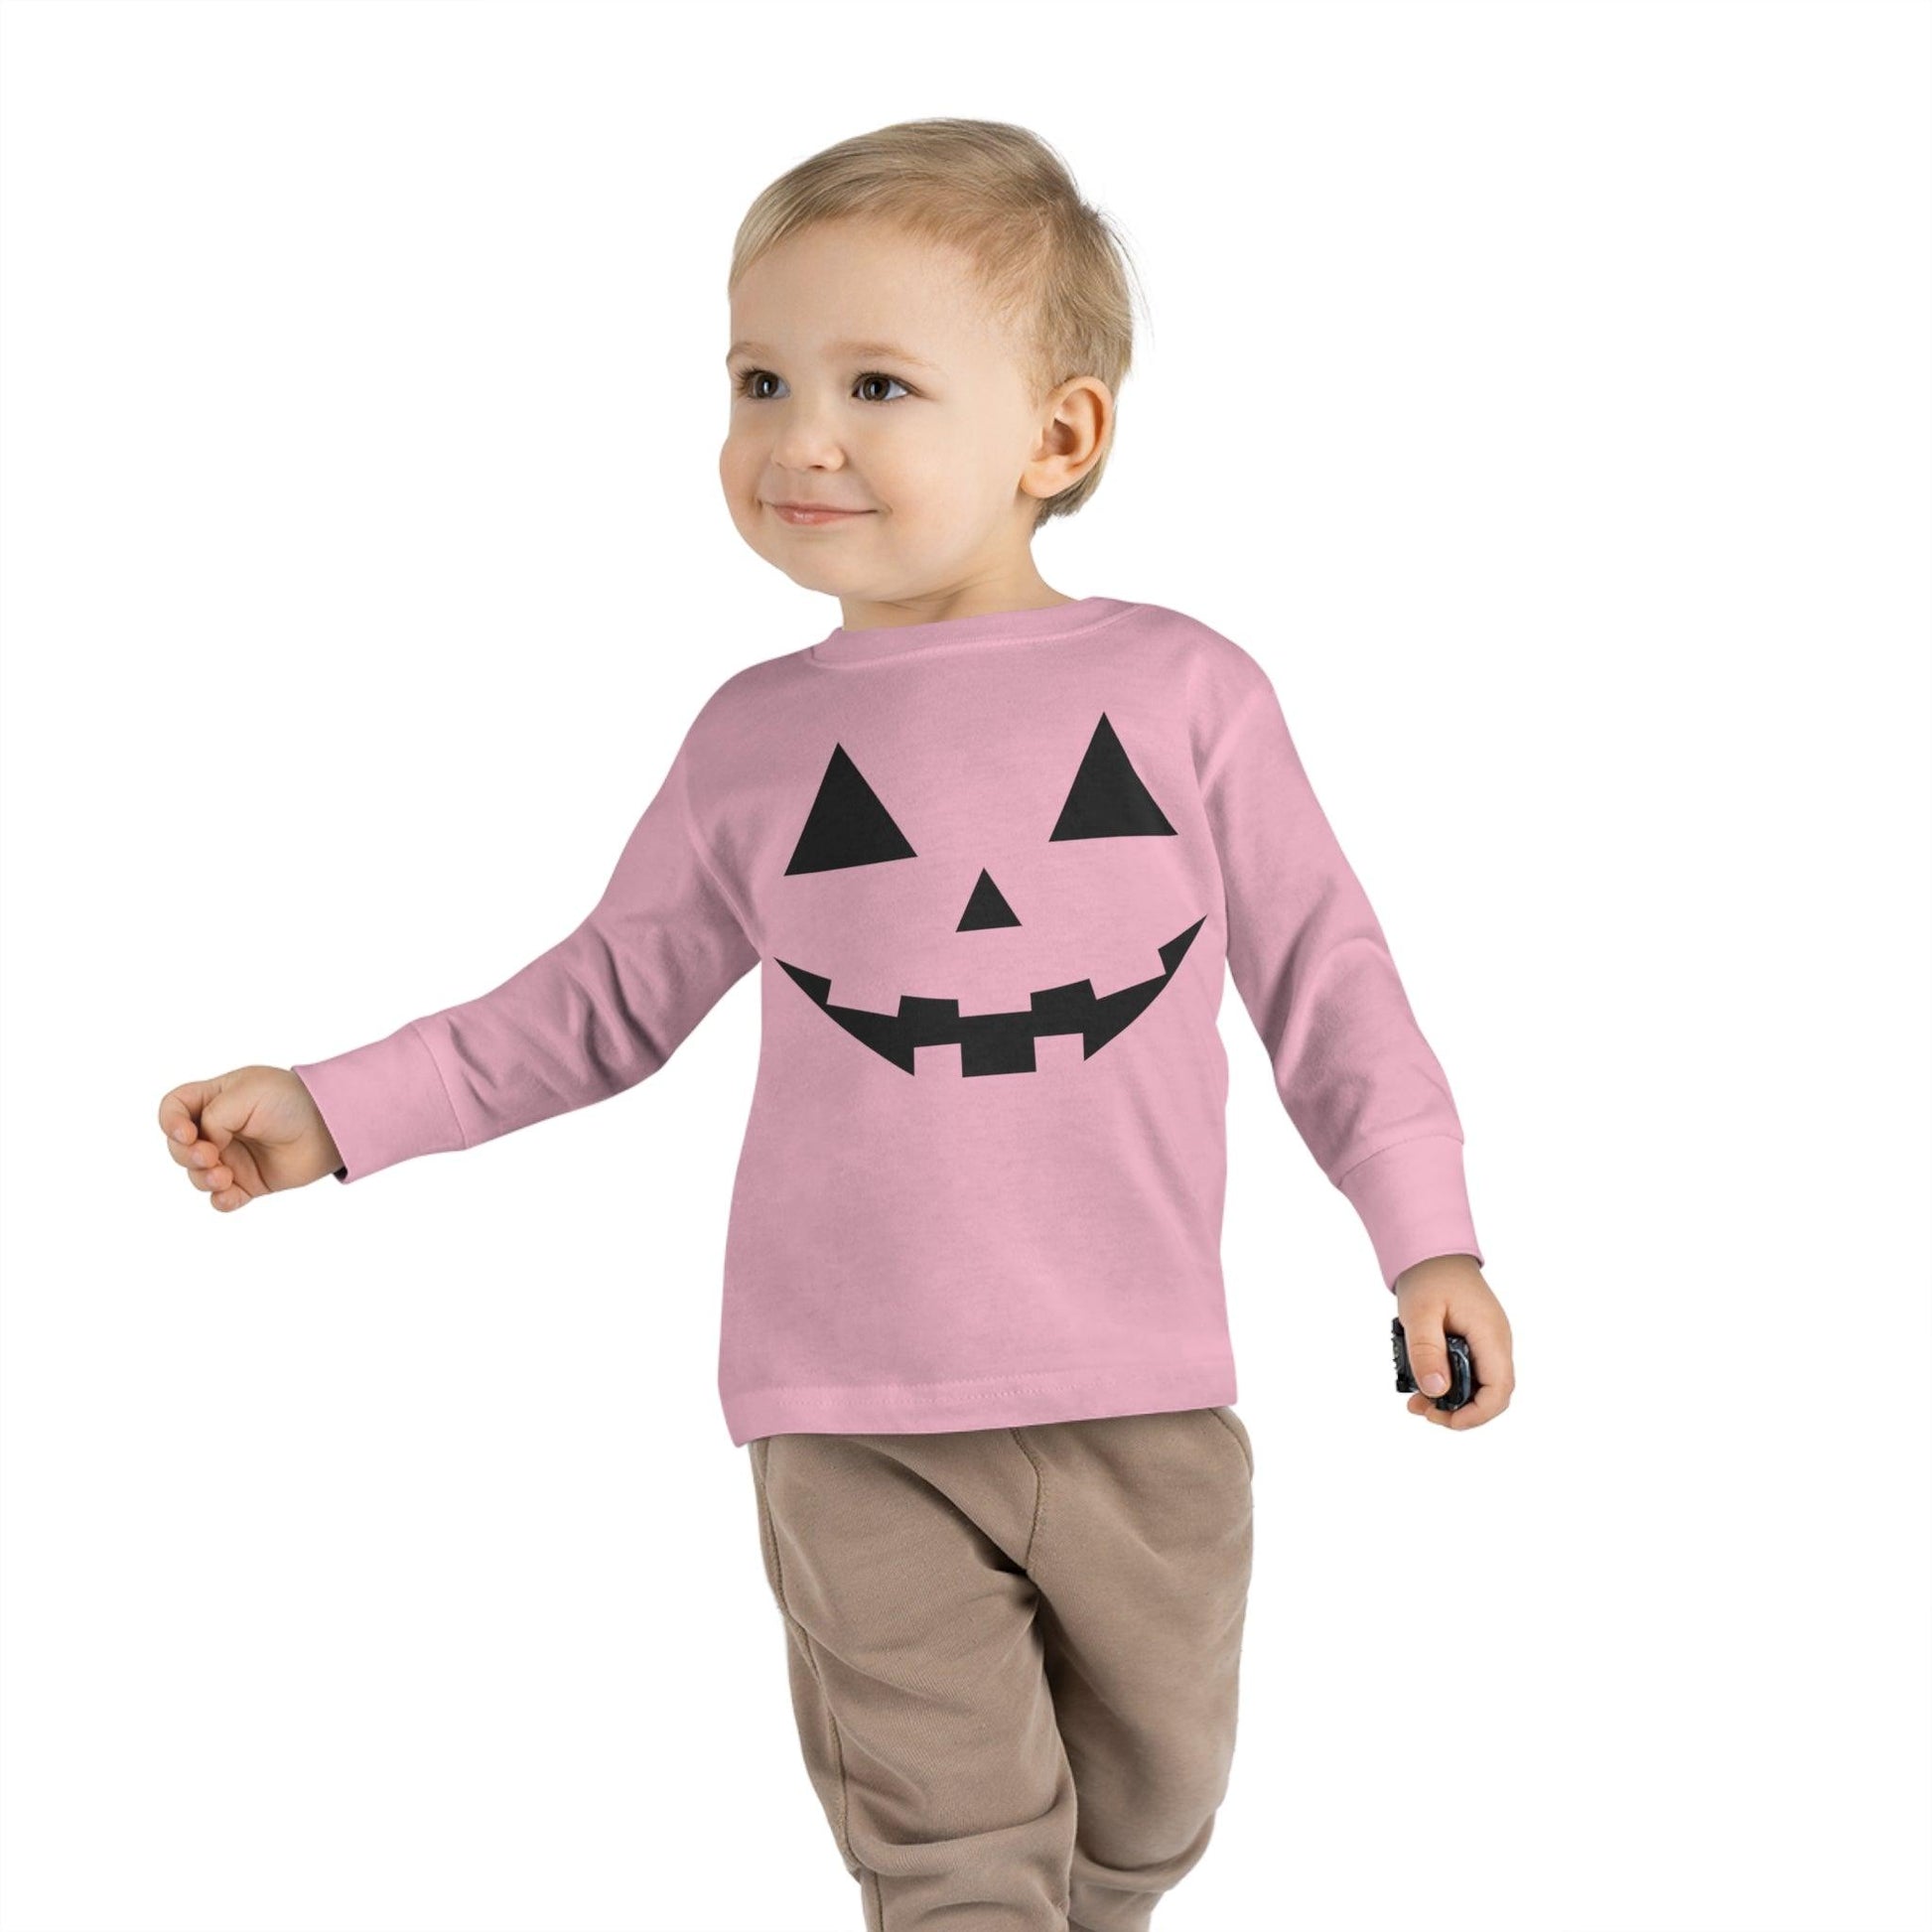 Kids Jack O Lantern Shirt Kids scary Faces Halloween Pumpkin Face Shirt Kids Halloween Shirt Kids Long Sleeve Trick or Treat Outfit for Halloween - Giftsmojo